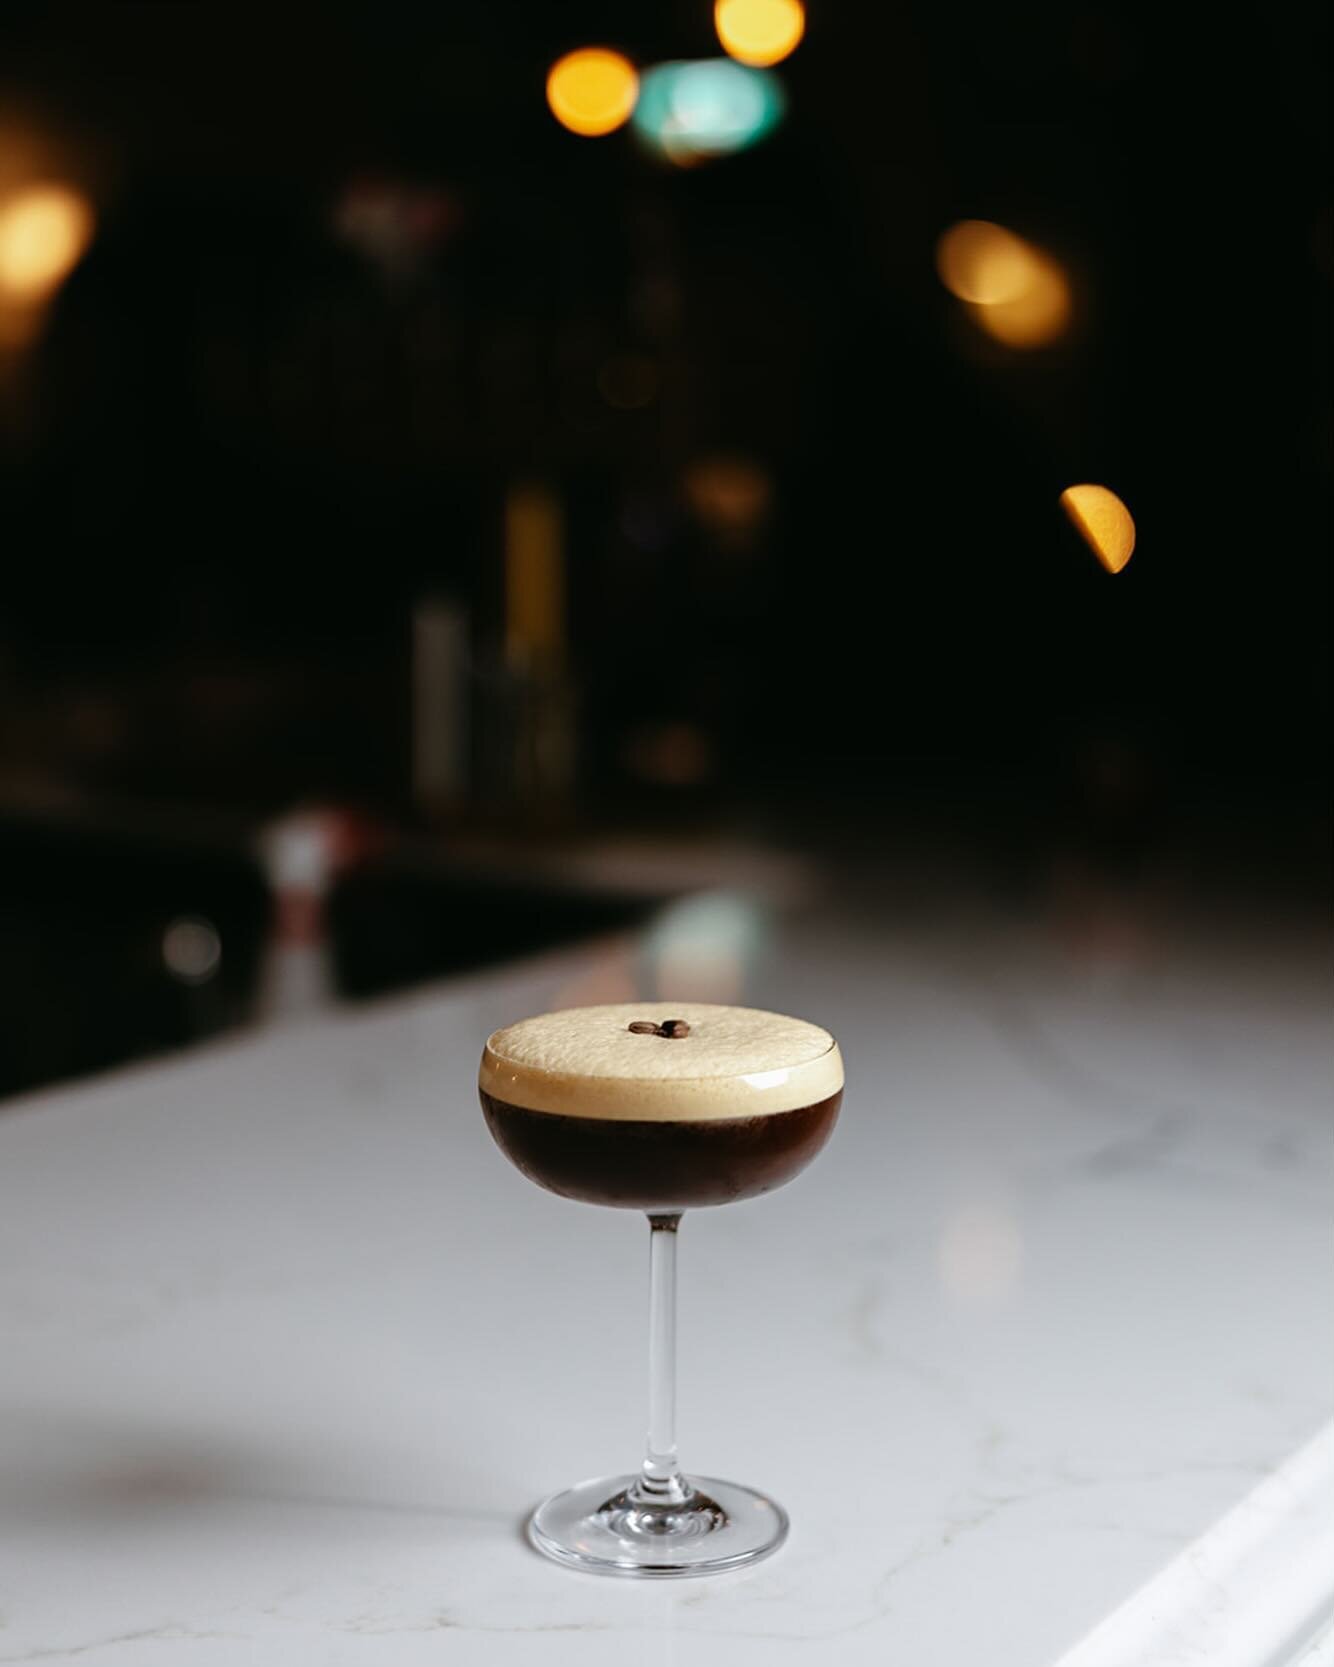 C O F F Y Espresso Tini - Confident, strong and loyal. Always consistent and comes through. Every Time.